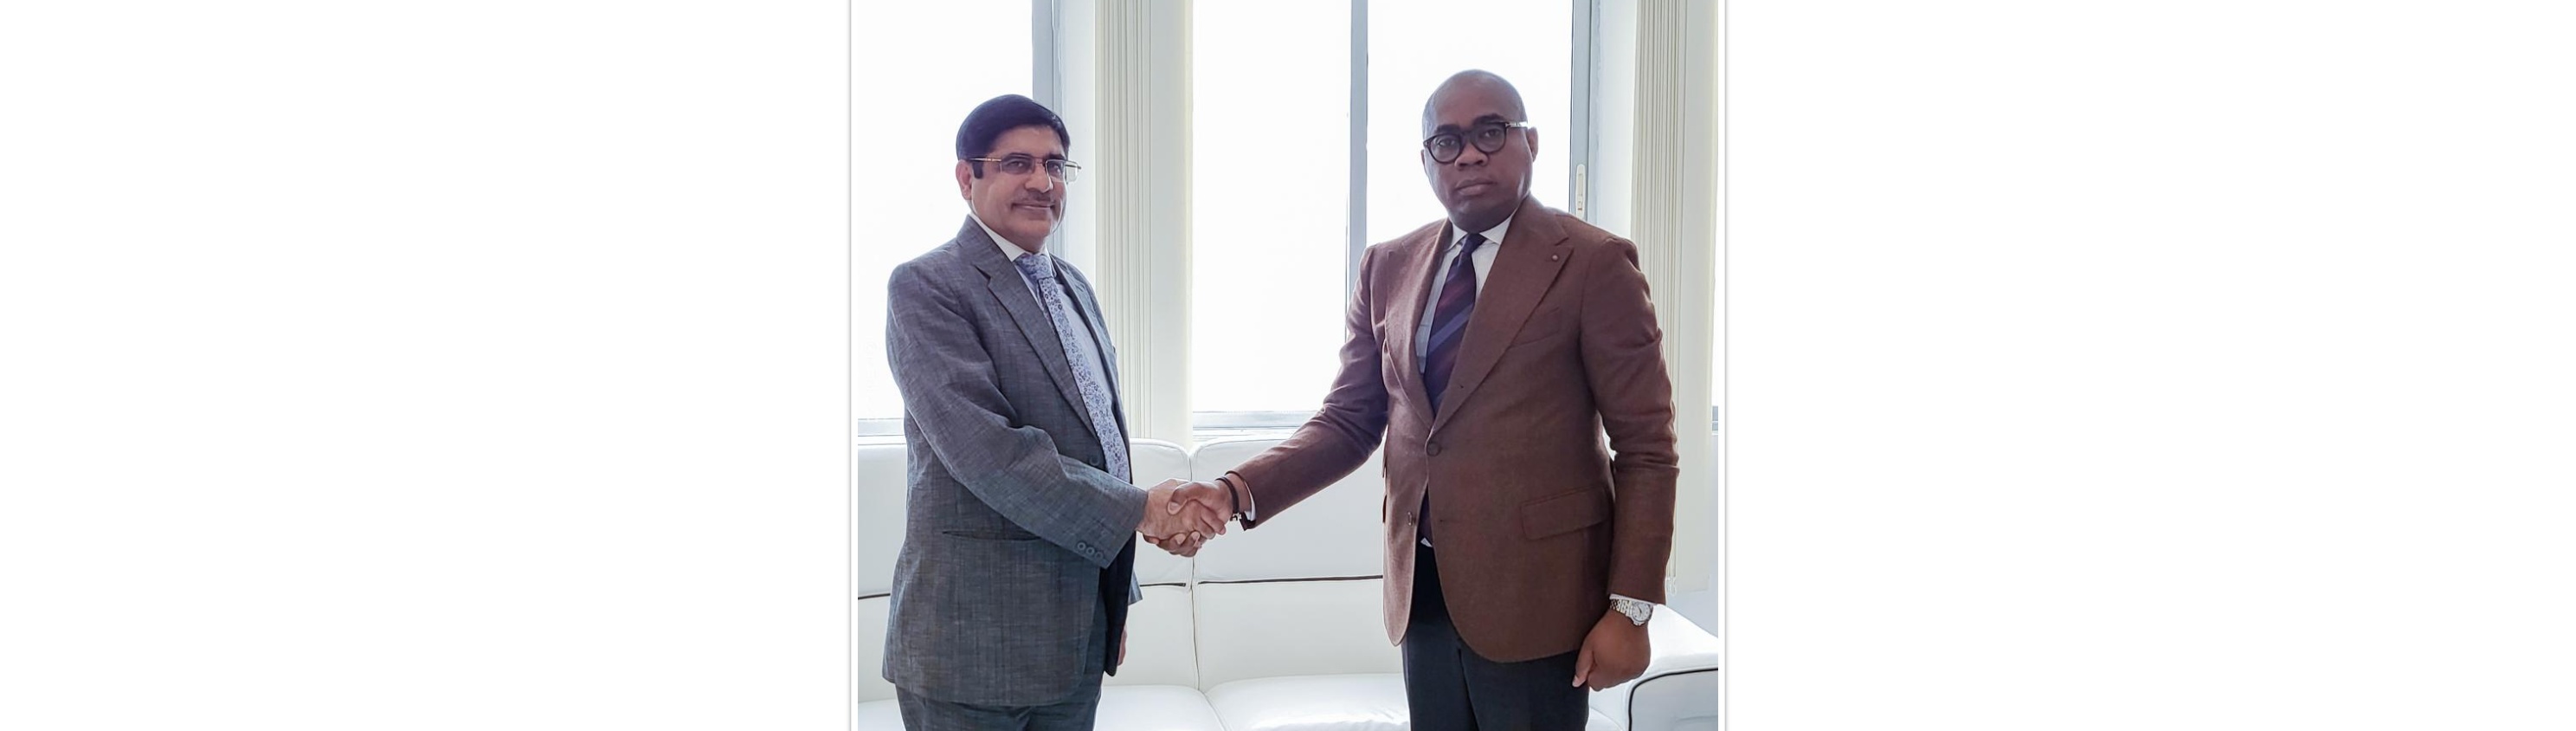  Ambassador Sanjiv Tandon called on H.E. Mr. Kokou Tengue, Hon'ble Minister of Maritime Economy, Fishing and Coastal Protection of Togo. They discussed existing cooperation areas and scope for enhancing cooperation.
